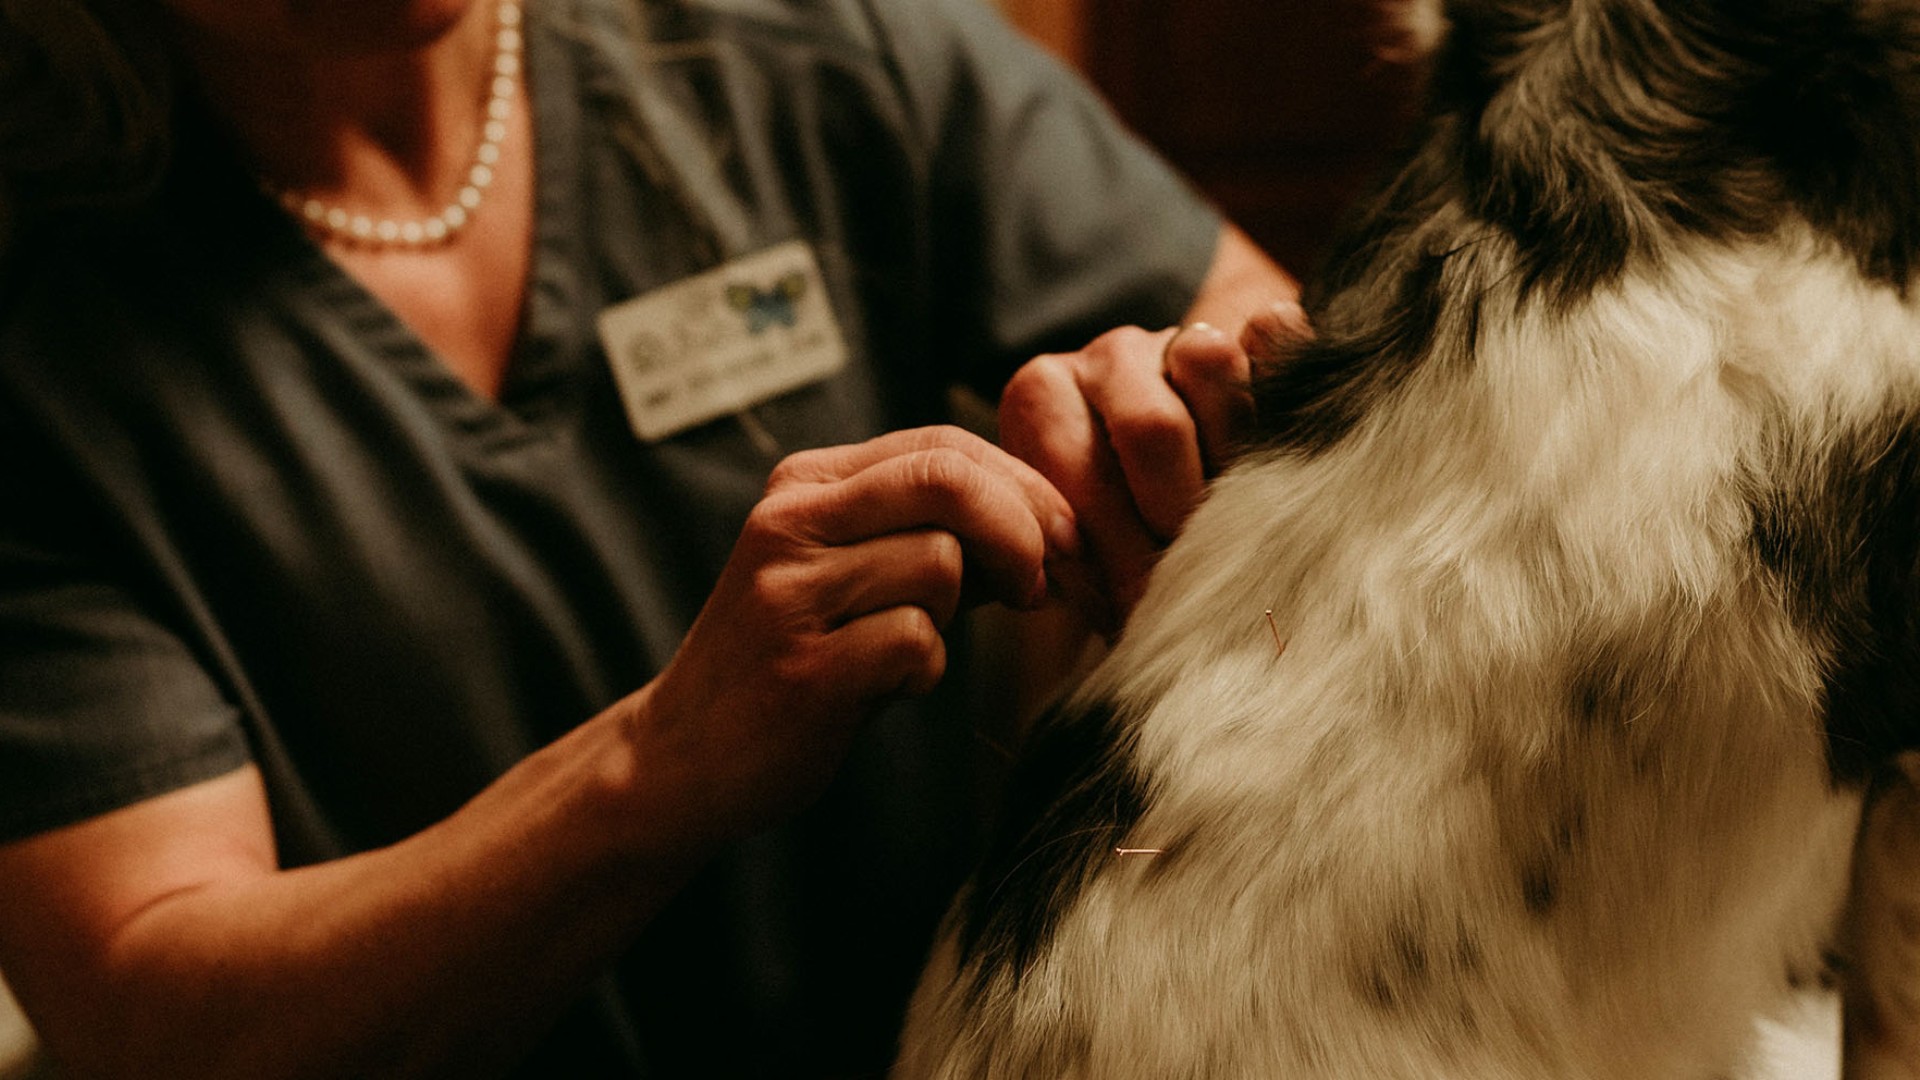 A vet staff treating a dog with acupuncture